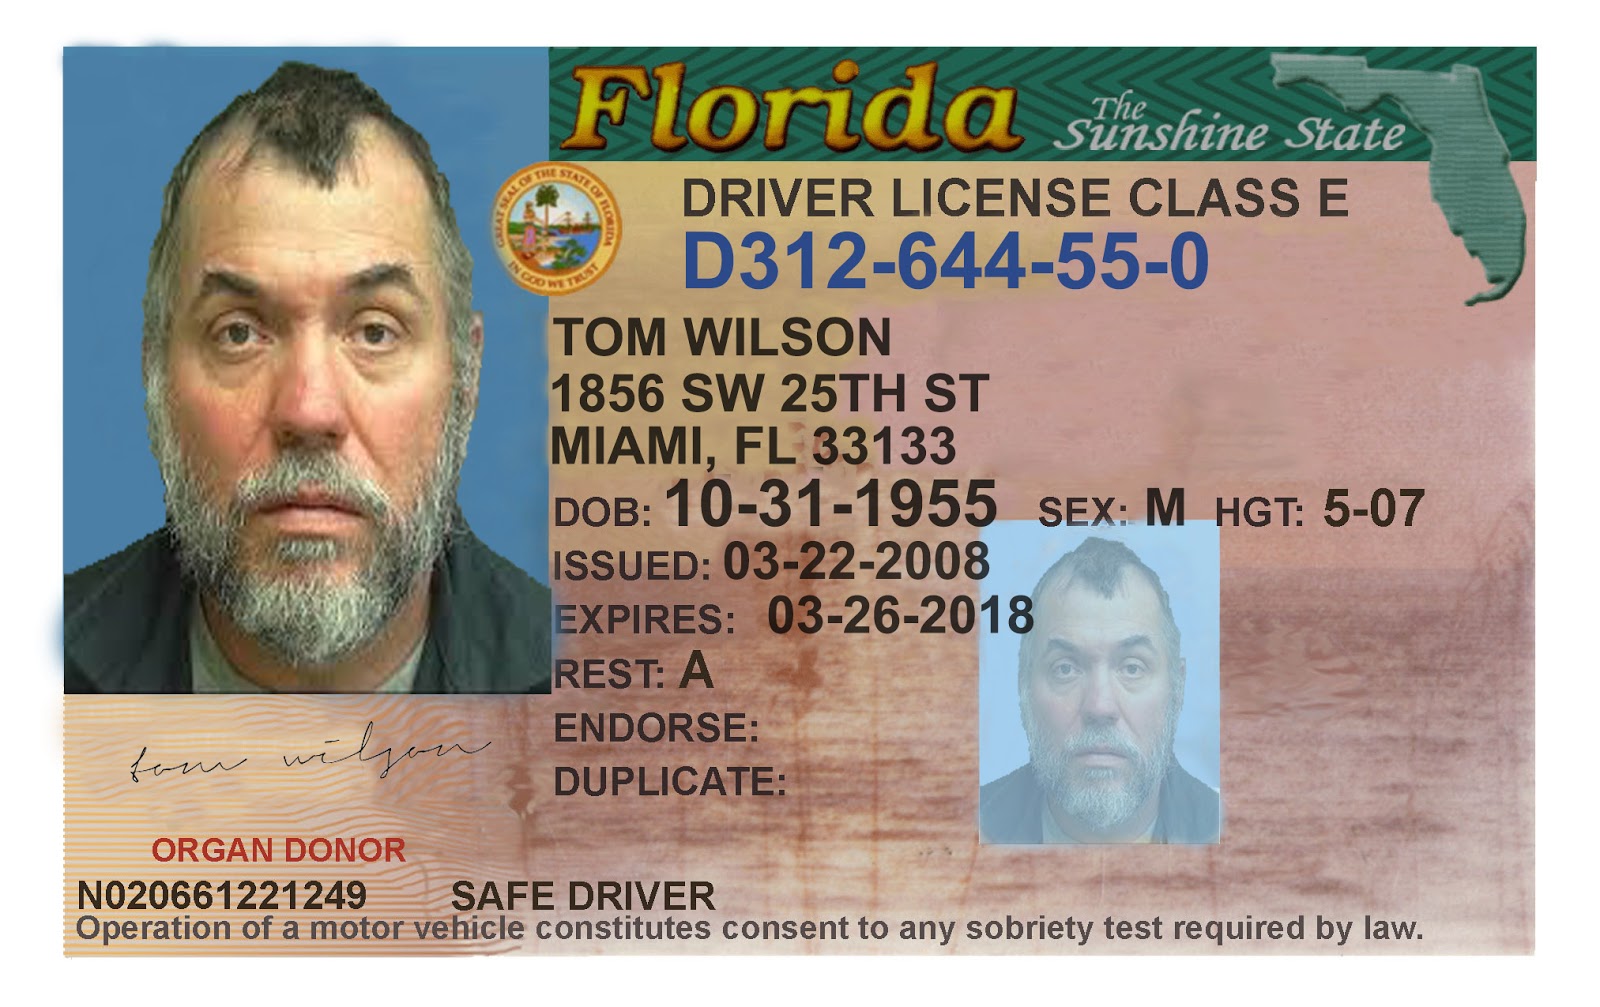 fl drivers license back ground check